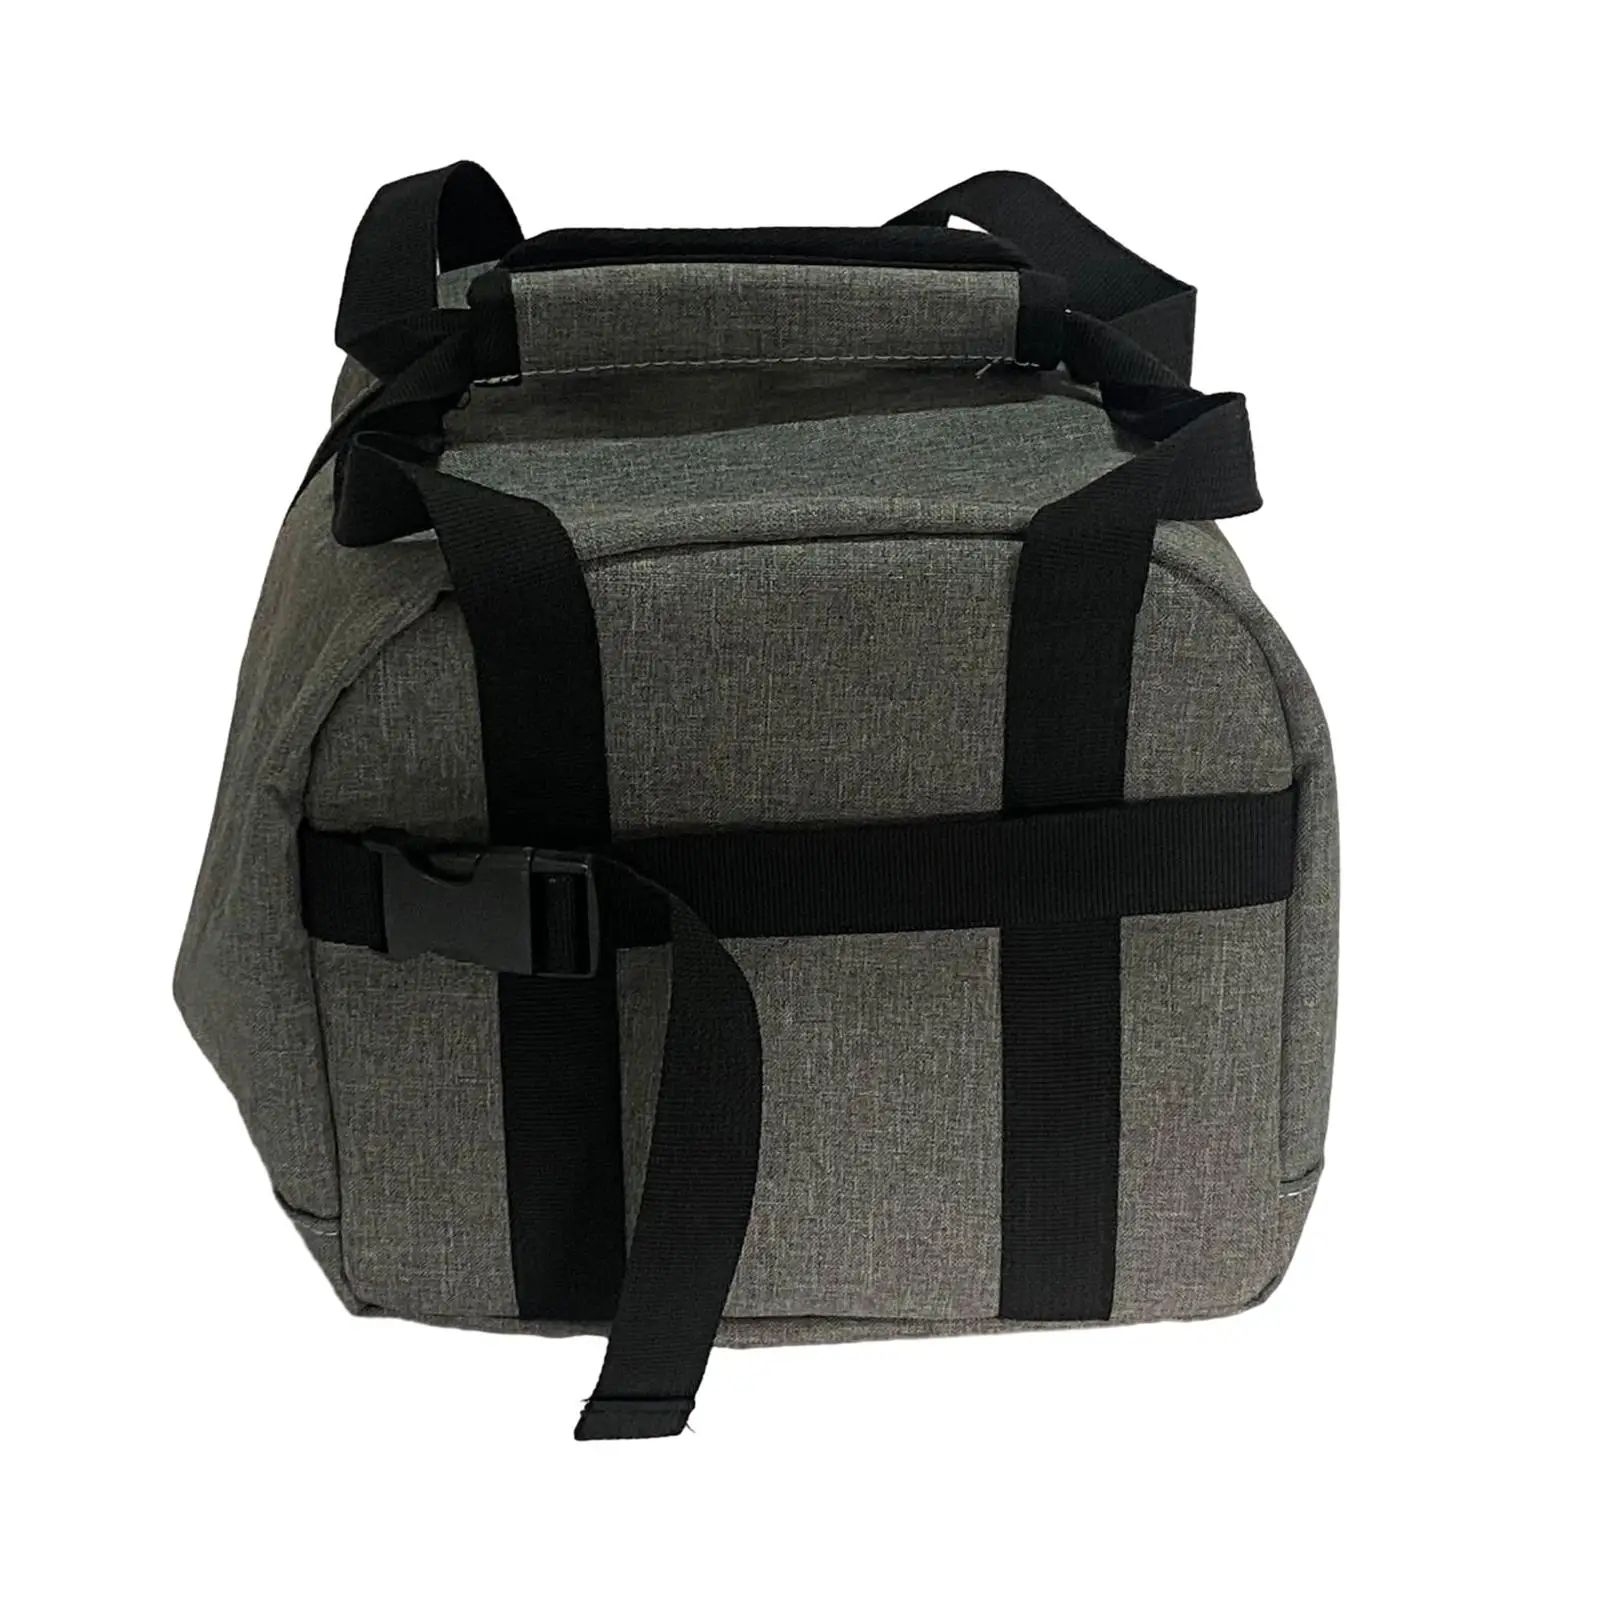 Single Bowling Ball Bag Oxford Cloth with Padded Ball Stand Add on Adjustable Strap for Easy Carrying Handbag Bowling Gift